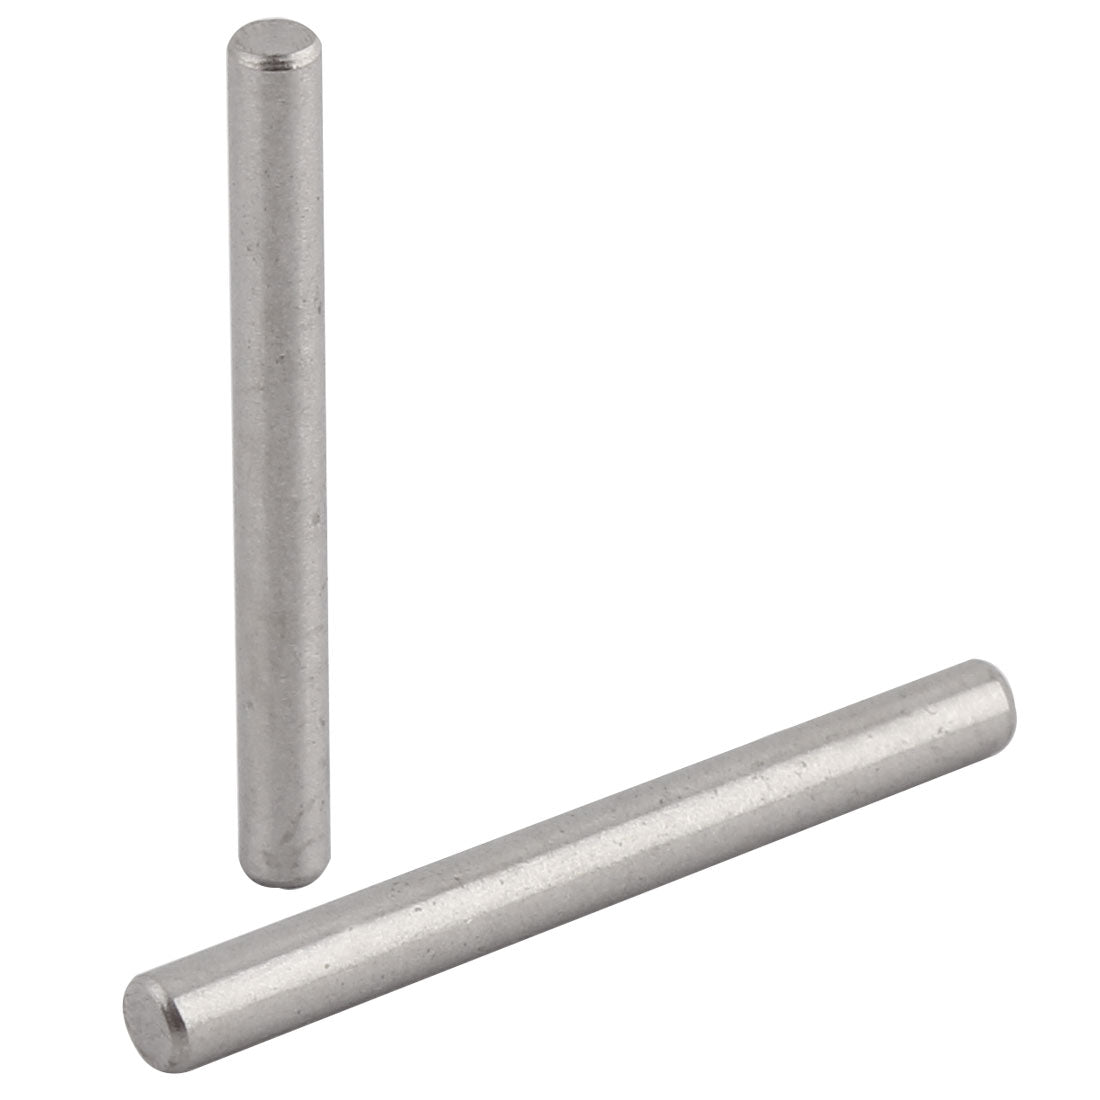 uxcell Uxcell Straight Retaining 304 Stainless Steel Dowel Pins Rod Fasten Elements 3mm x 30mm 10 Pcs